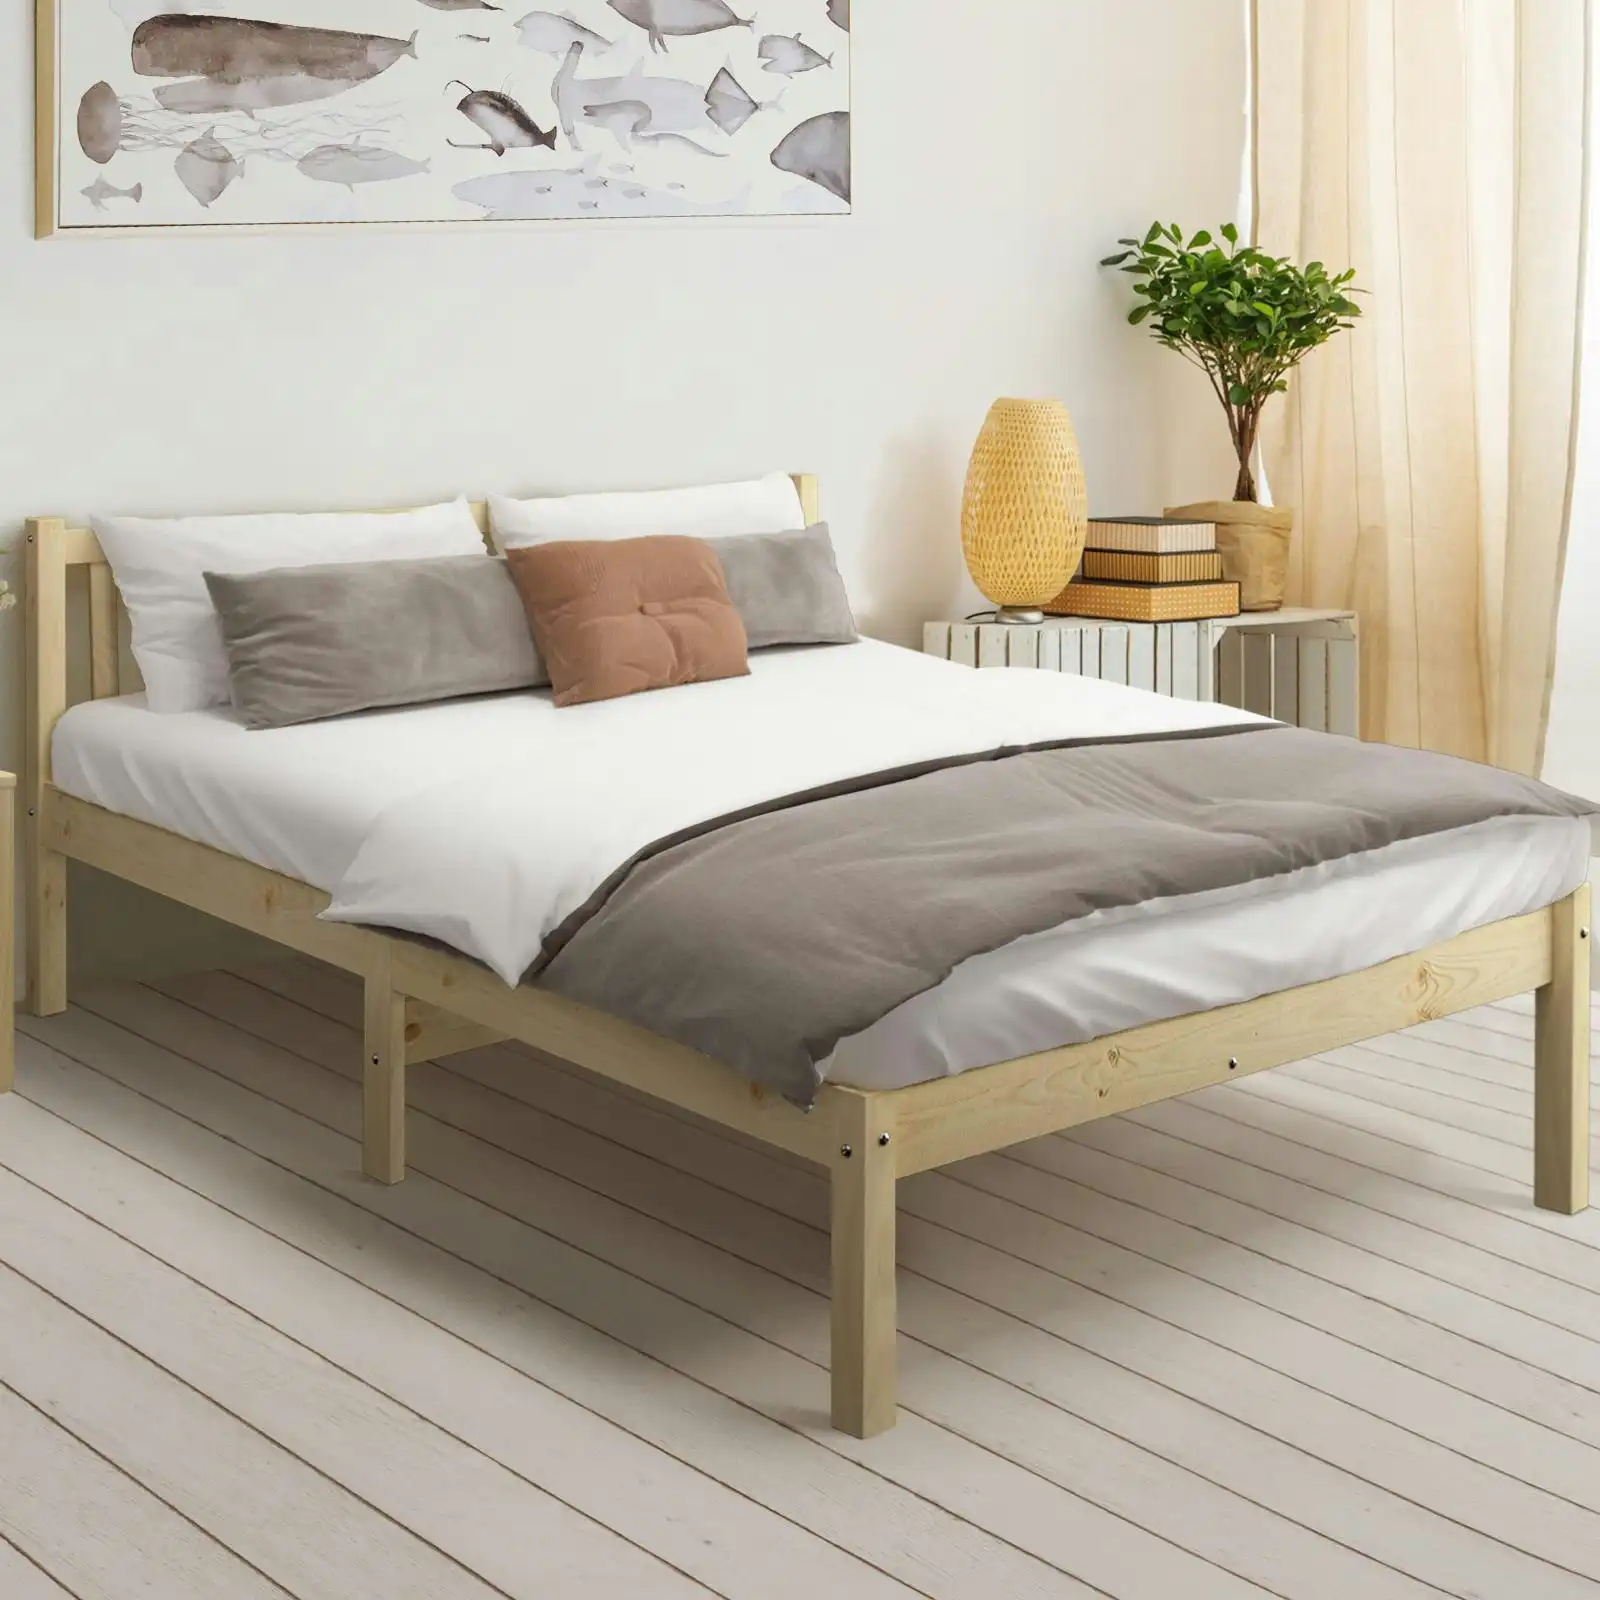 Oikiture Bed Frame King Size Wooden Timber Mattress Base Wood Headboard Bedroom